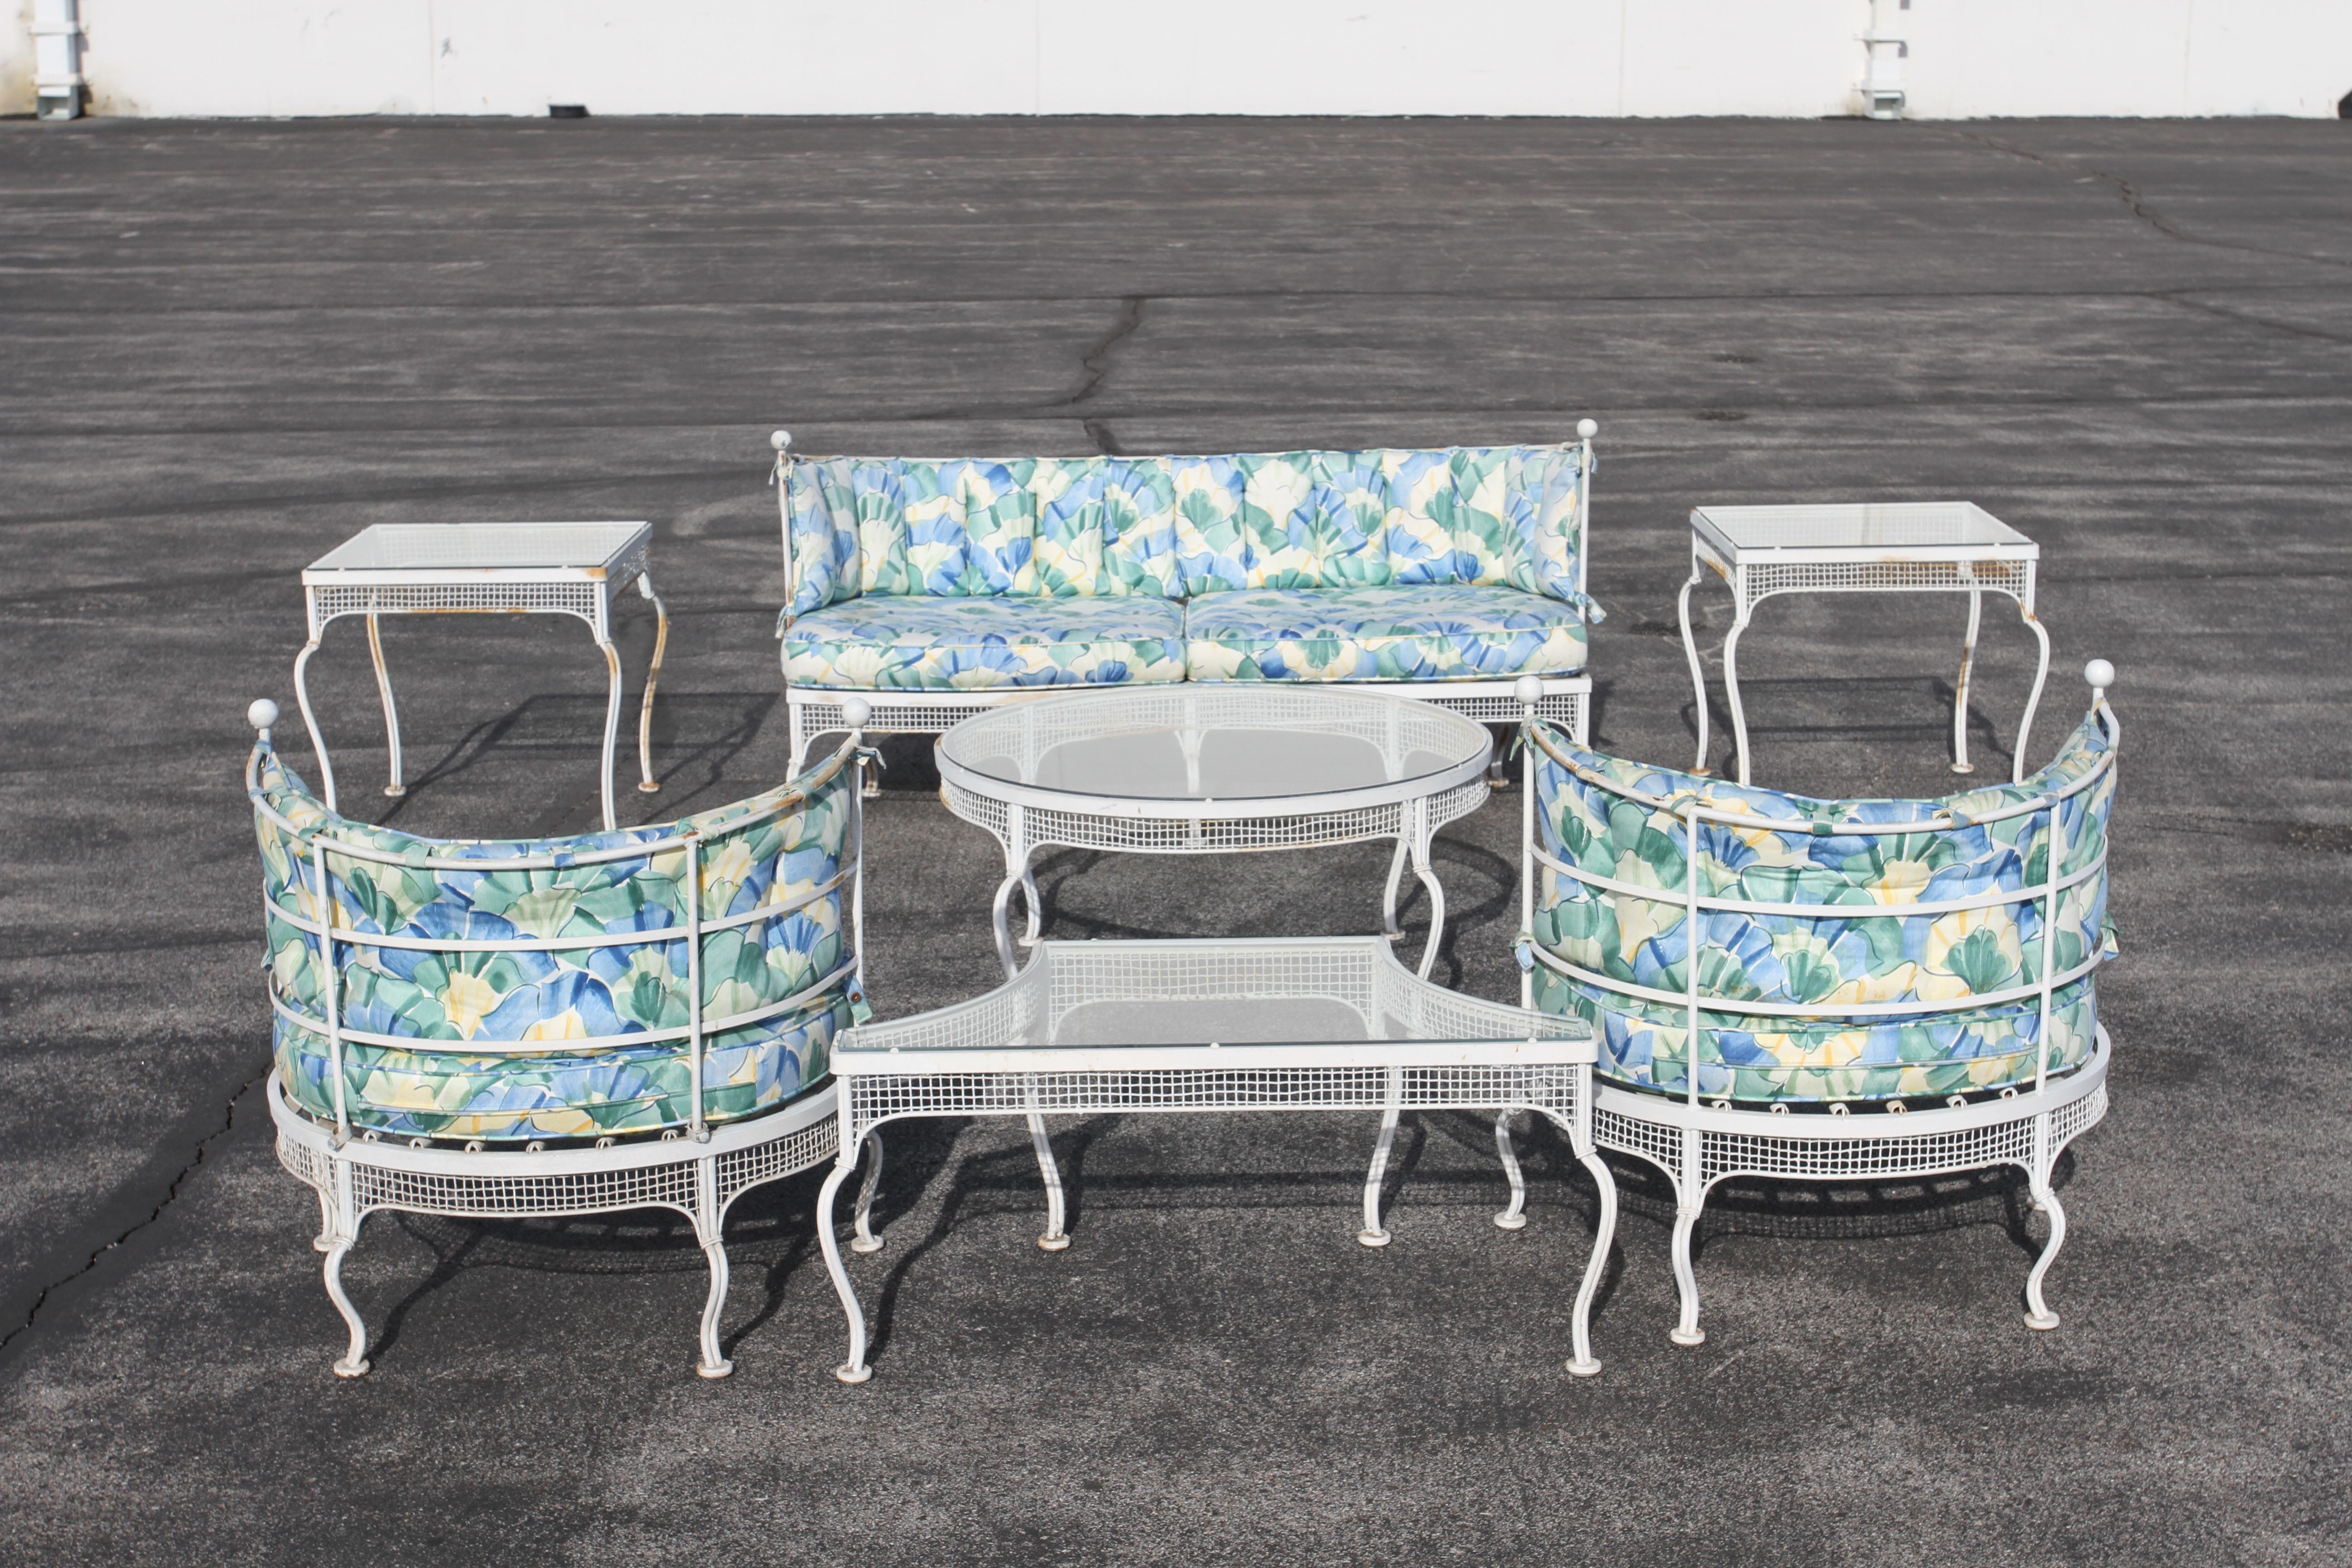 Rare 1950s Mid Century Modern Woodard Wrought Iron & Mesh Glass Top End Tables For Sale 4